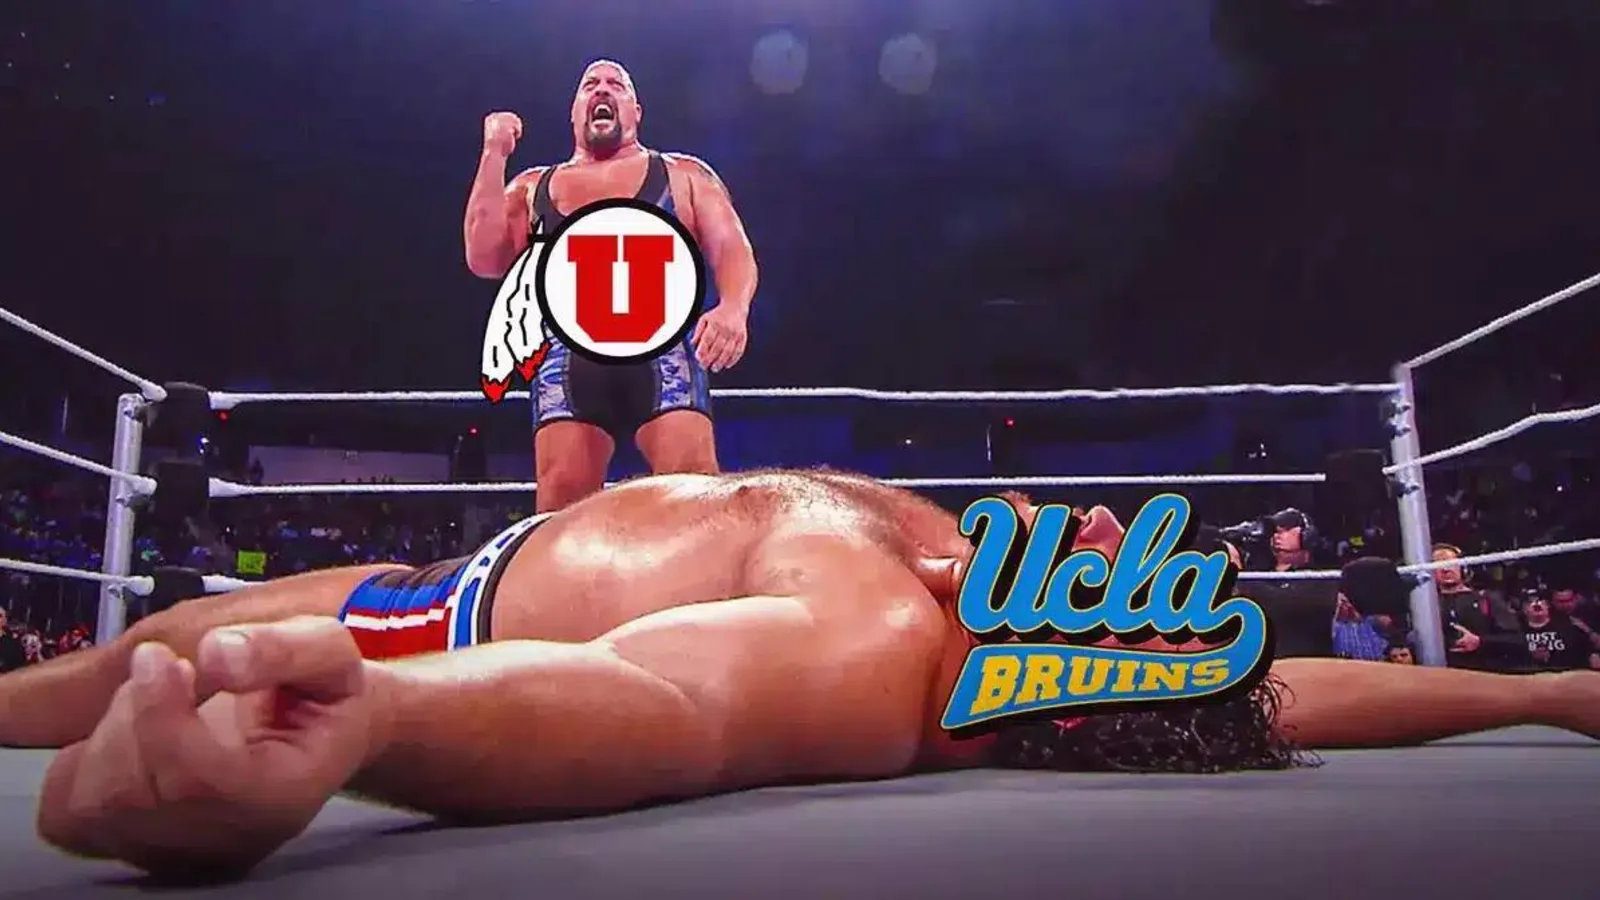 UCLA basketball: Stunned fans reacts to Bruins’ heartbreaking loss to Utah